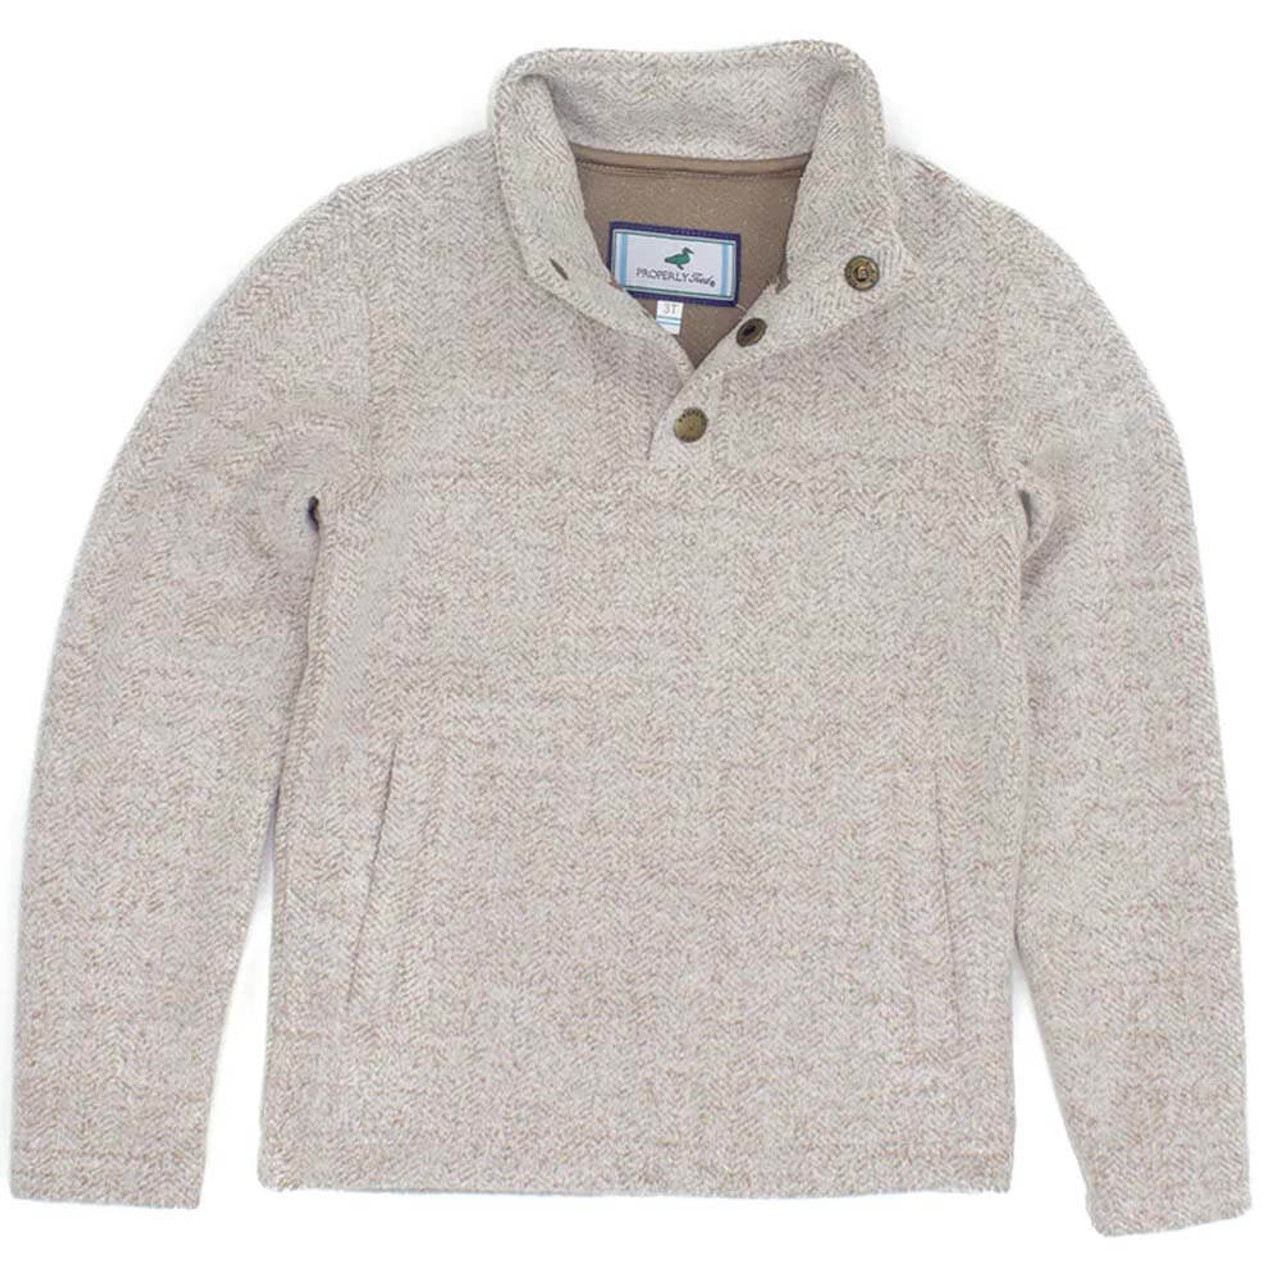 Boys' Properly Tied Upland Pullover Sweater | Eagle Eye Outfitters